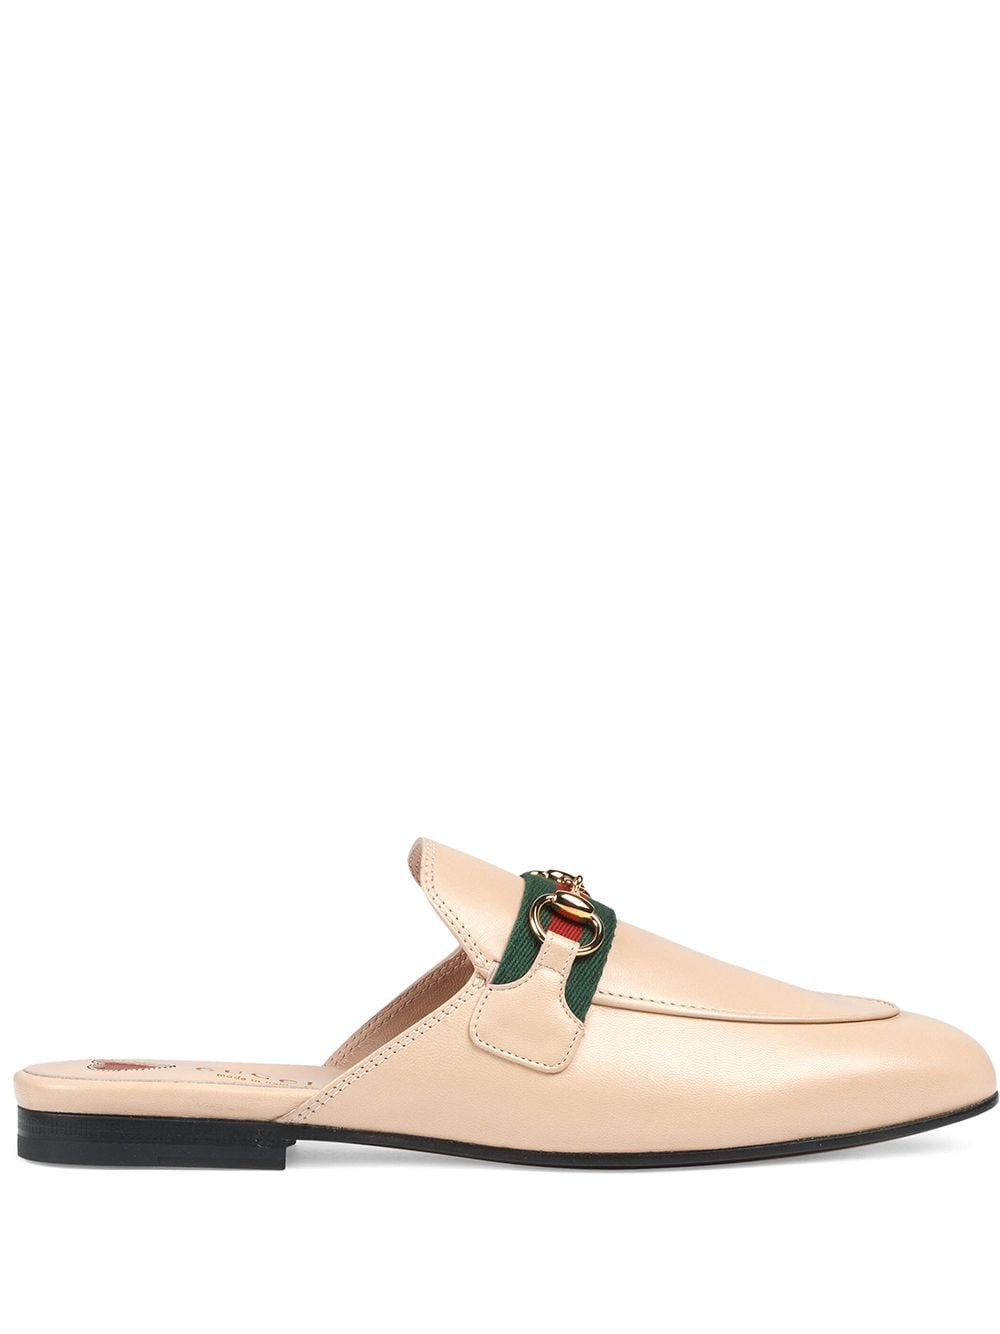 Gucci Princetown slippers - Beige